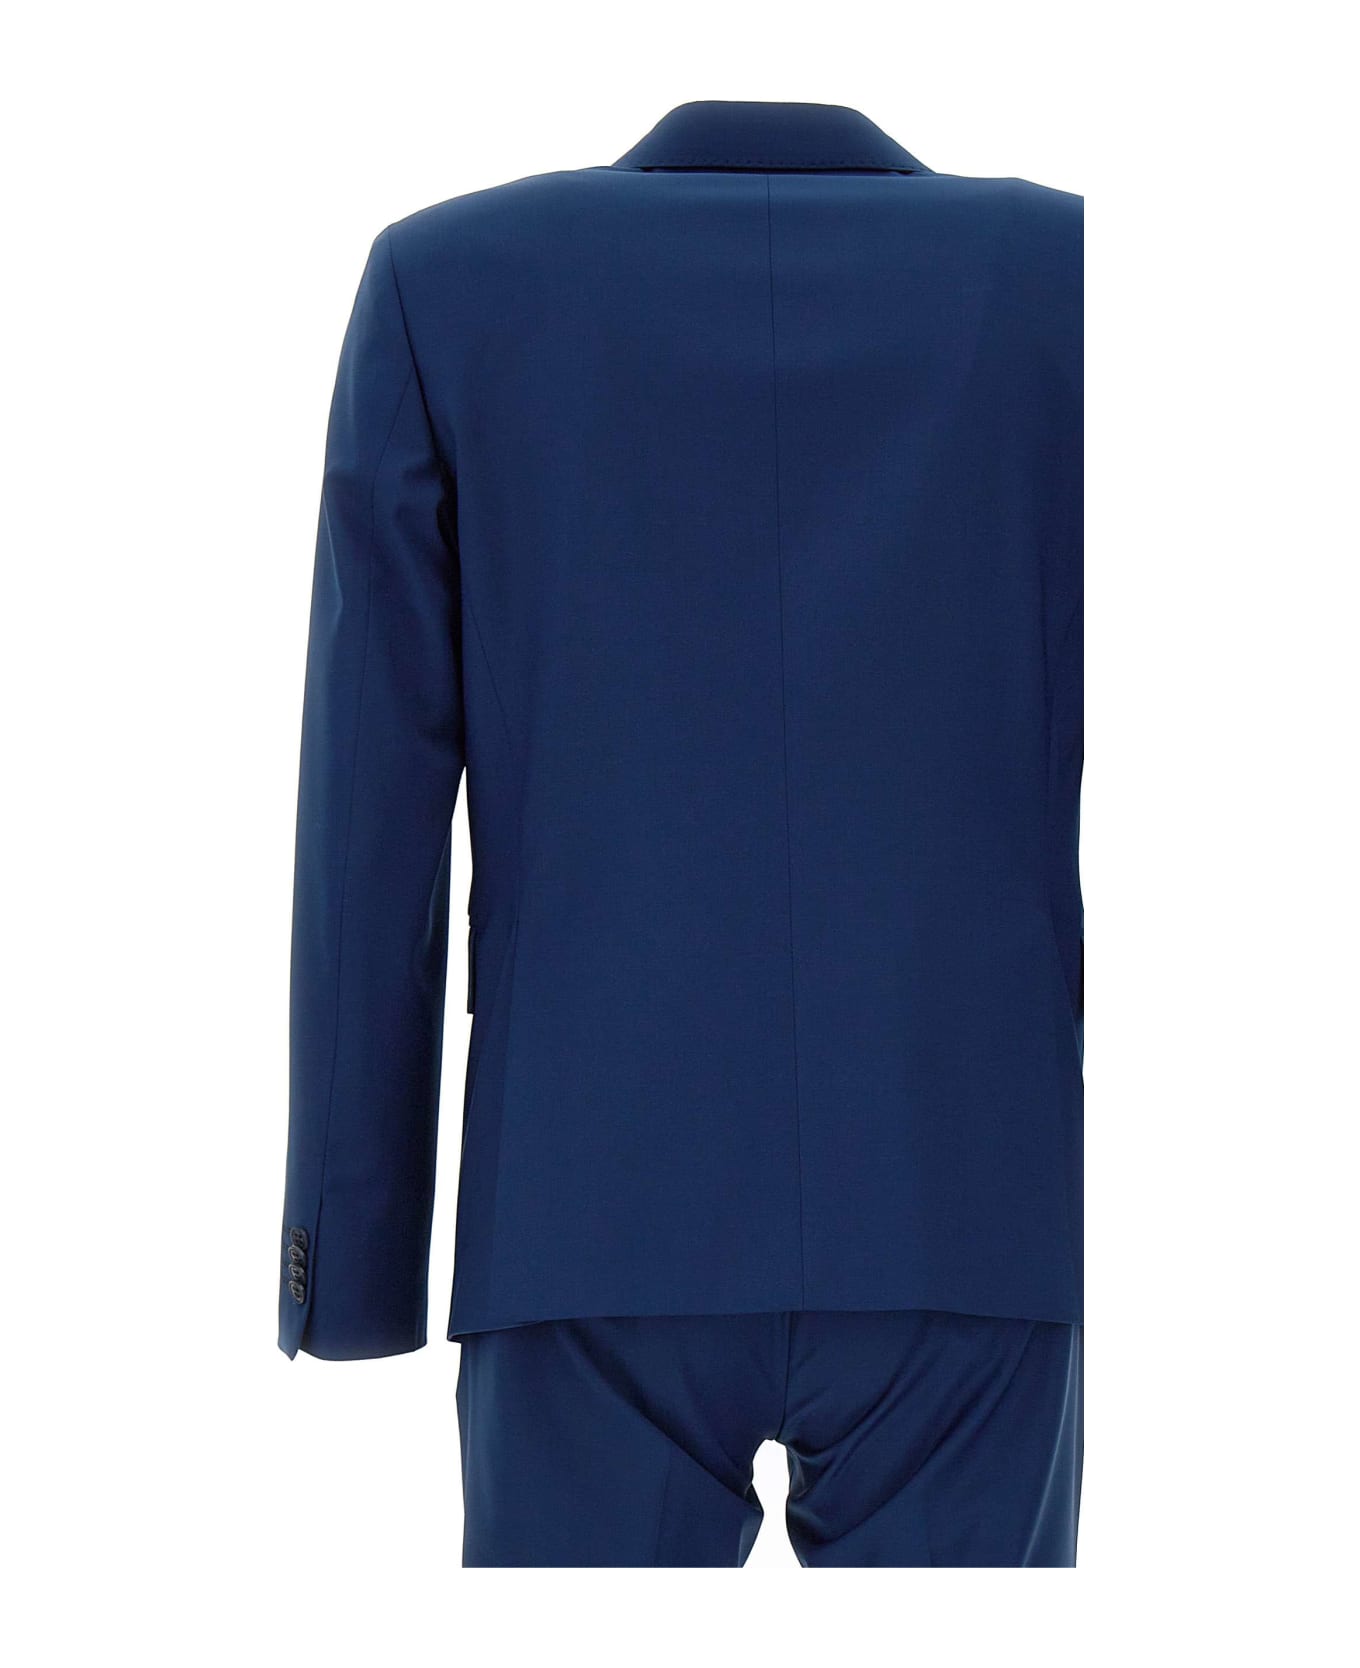 Brian Dales Two-piece Suit - BLUE スーツ